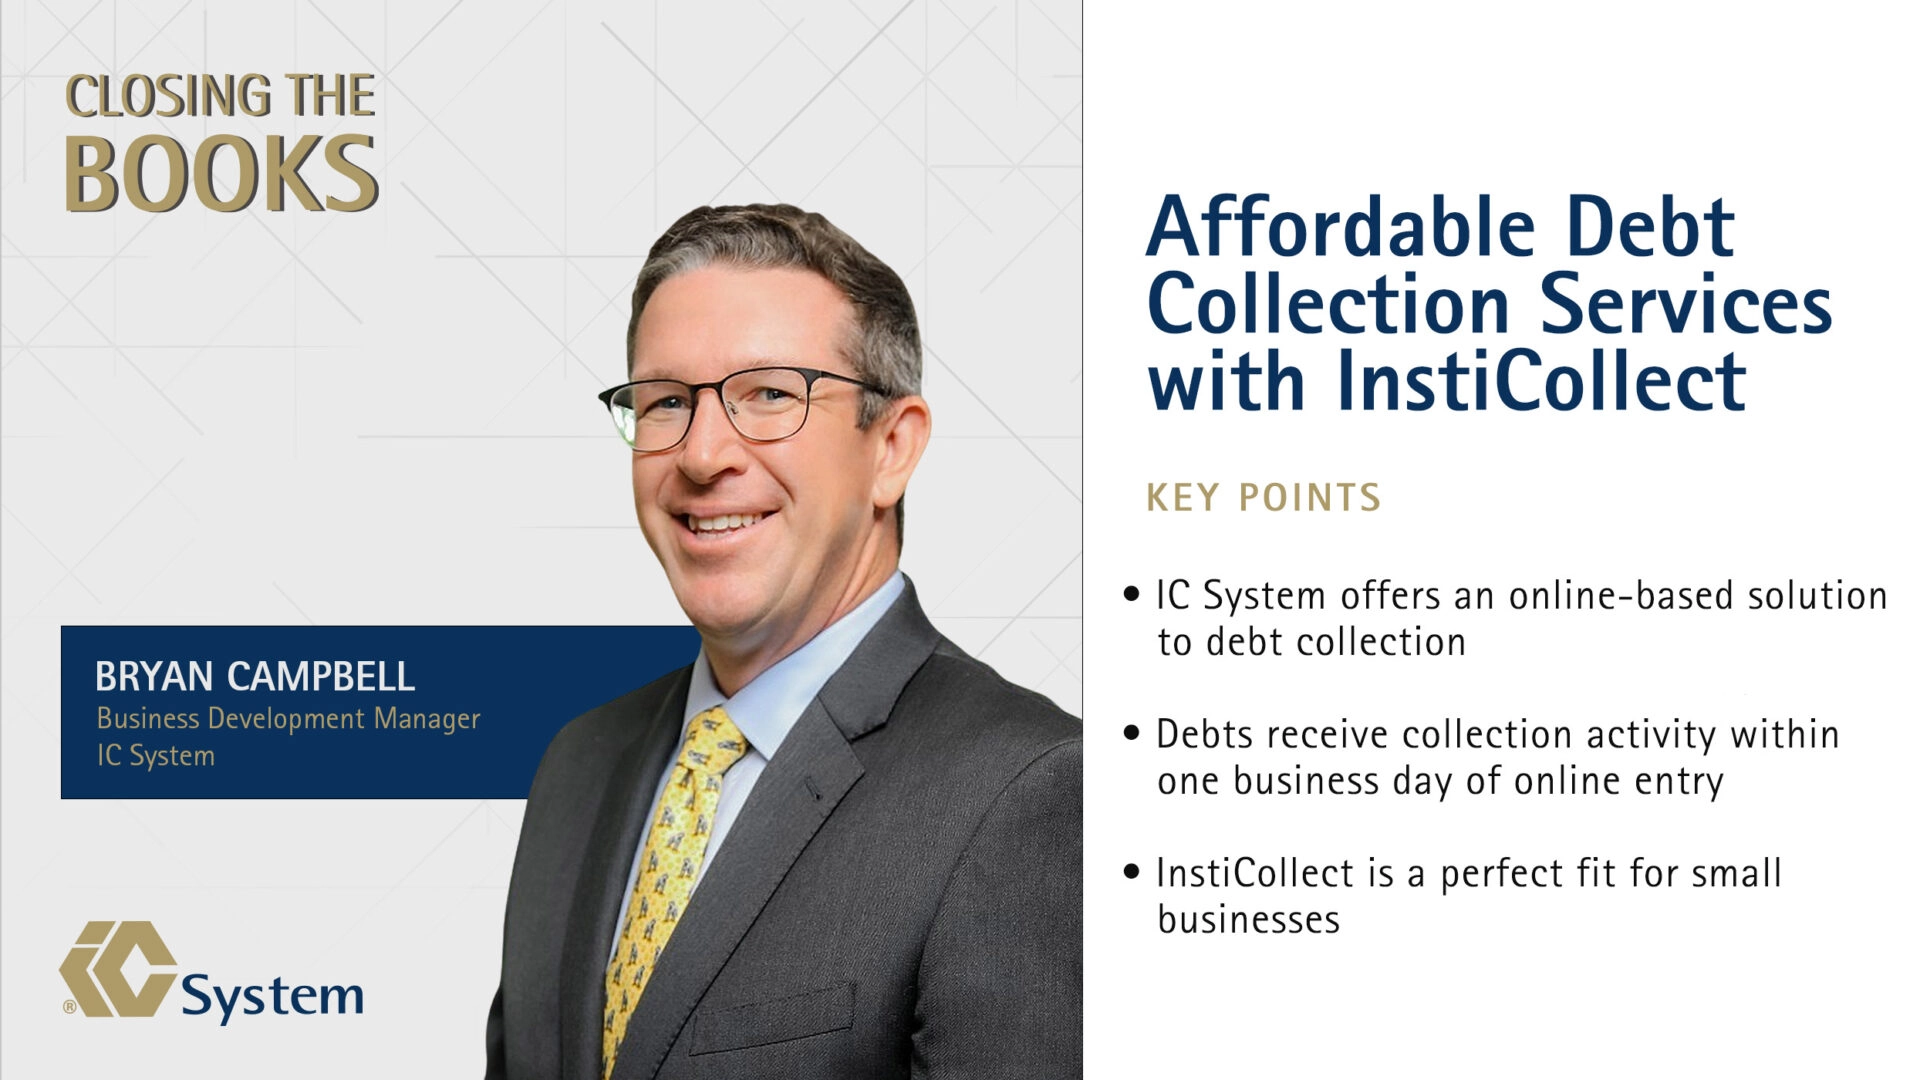 Closing the Books: Affordable Debt Collection Services with InstiCollect